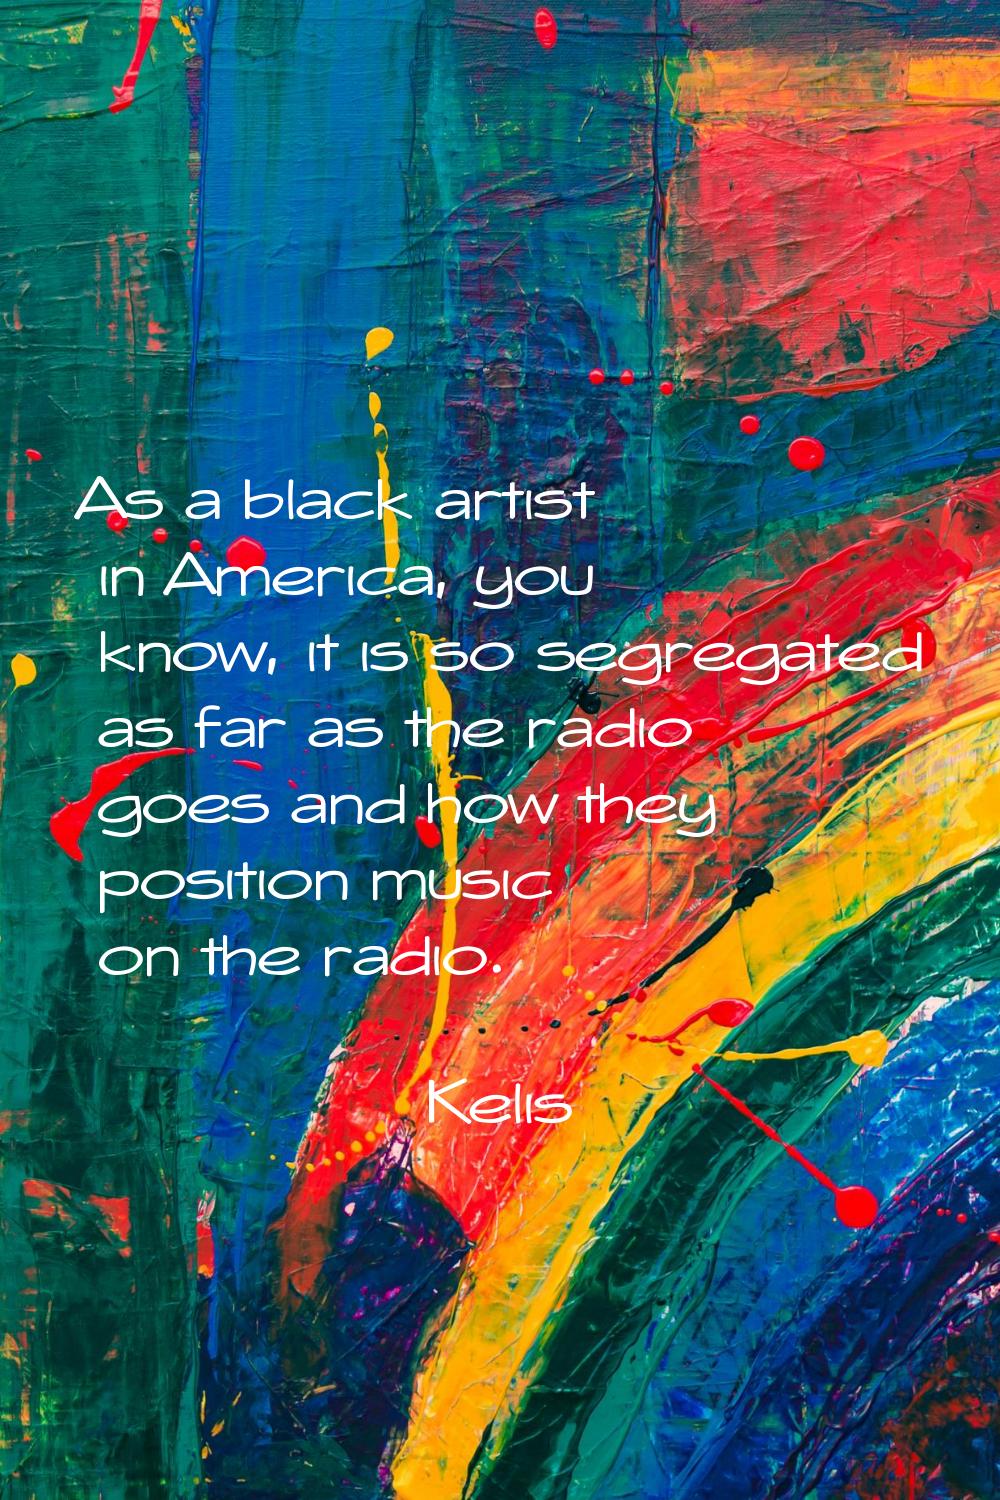 As a black artist in America, you know, it is so segregated as far as the radio goes and how they p